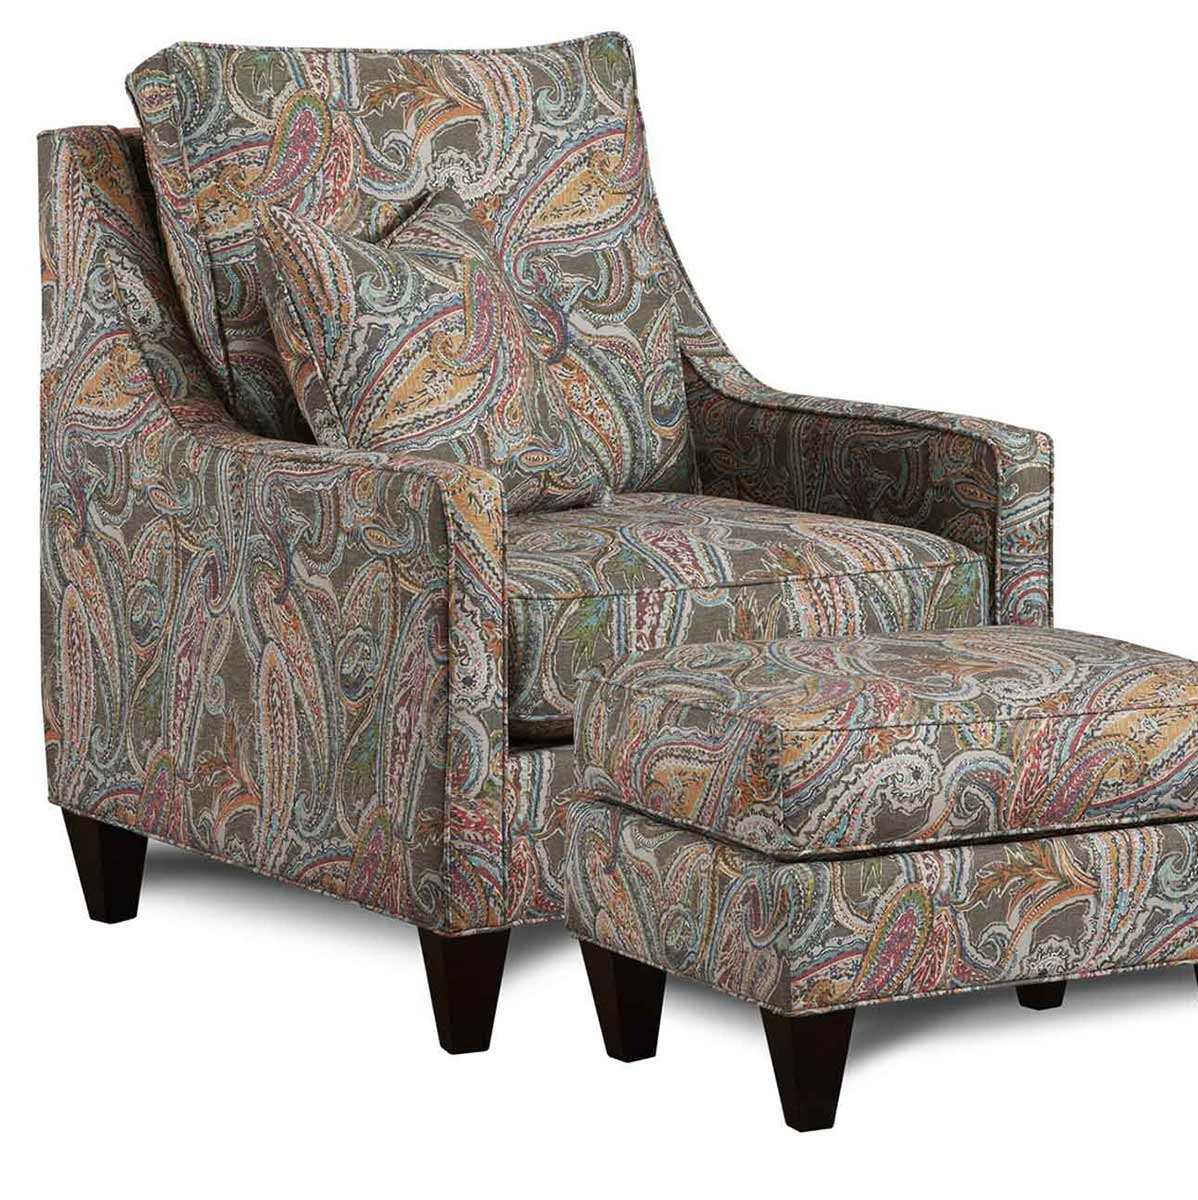 Chelsea Home Drury Accent Chair - Multicolor